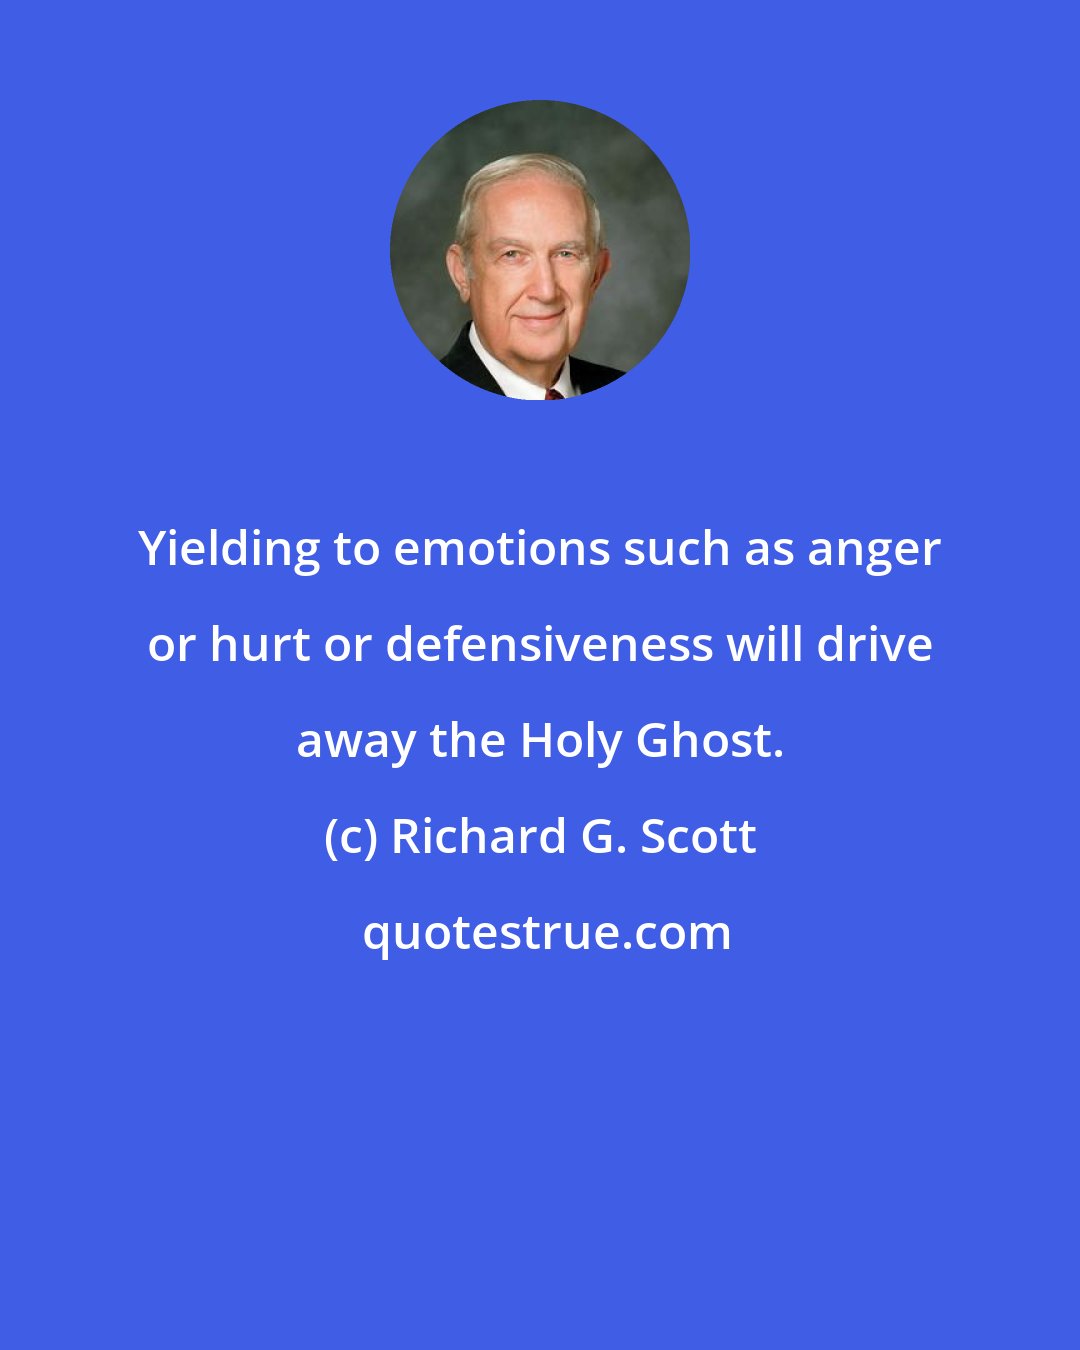 Richard G. Scott: Yielding to emotions such as anger or hurt or defensiveness will drive away the Holy Ghost.